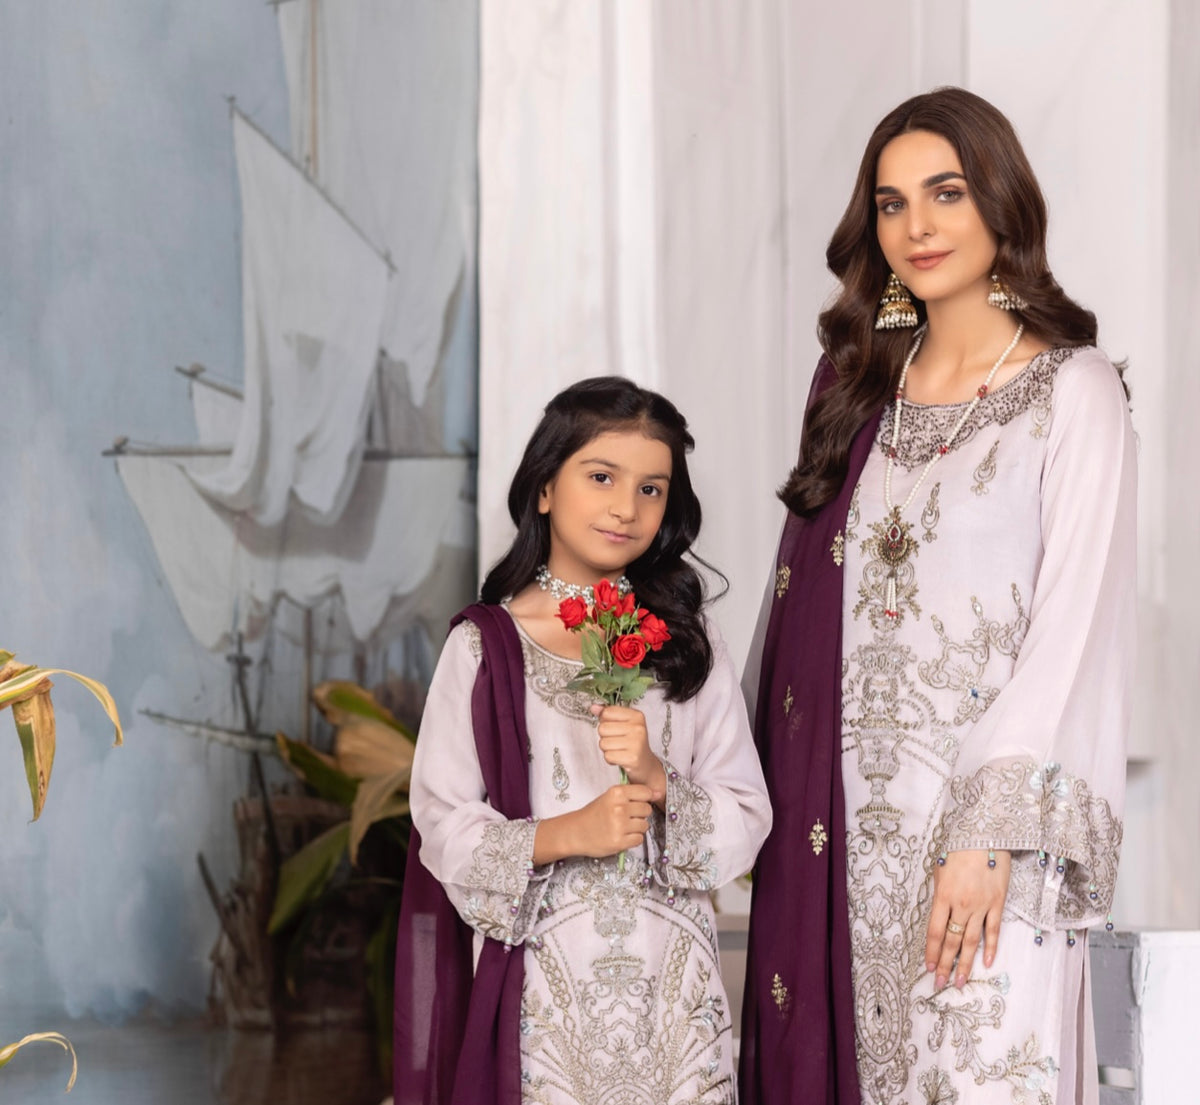 SIMRANS EXCLUSIVE | LUXURY CHIFFON MOTHER DAUGHTER/Kids READY TO WEAR | 023